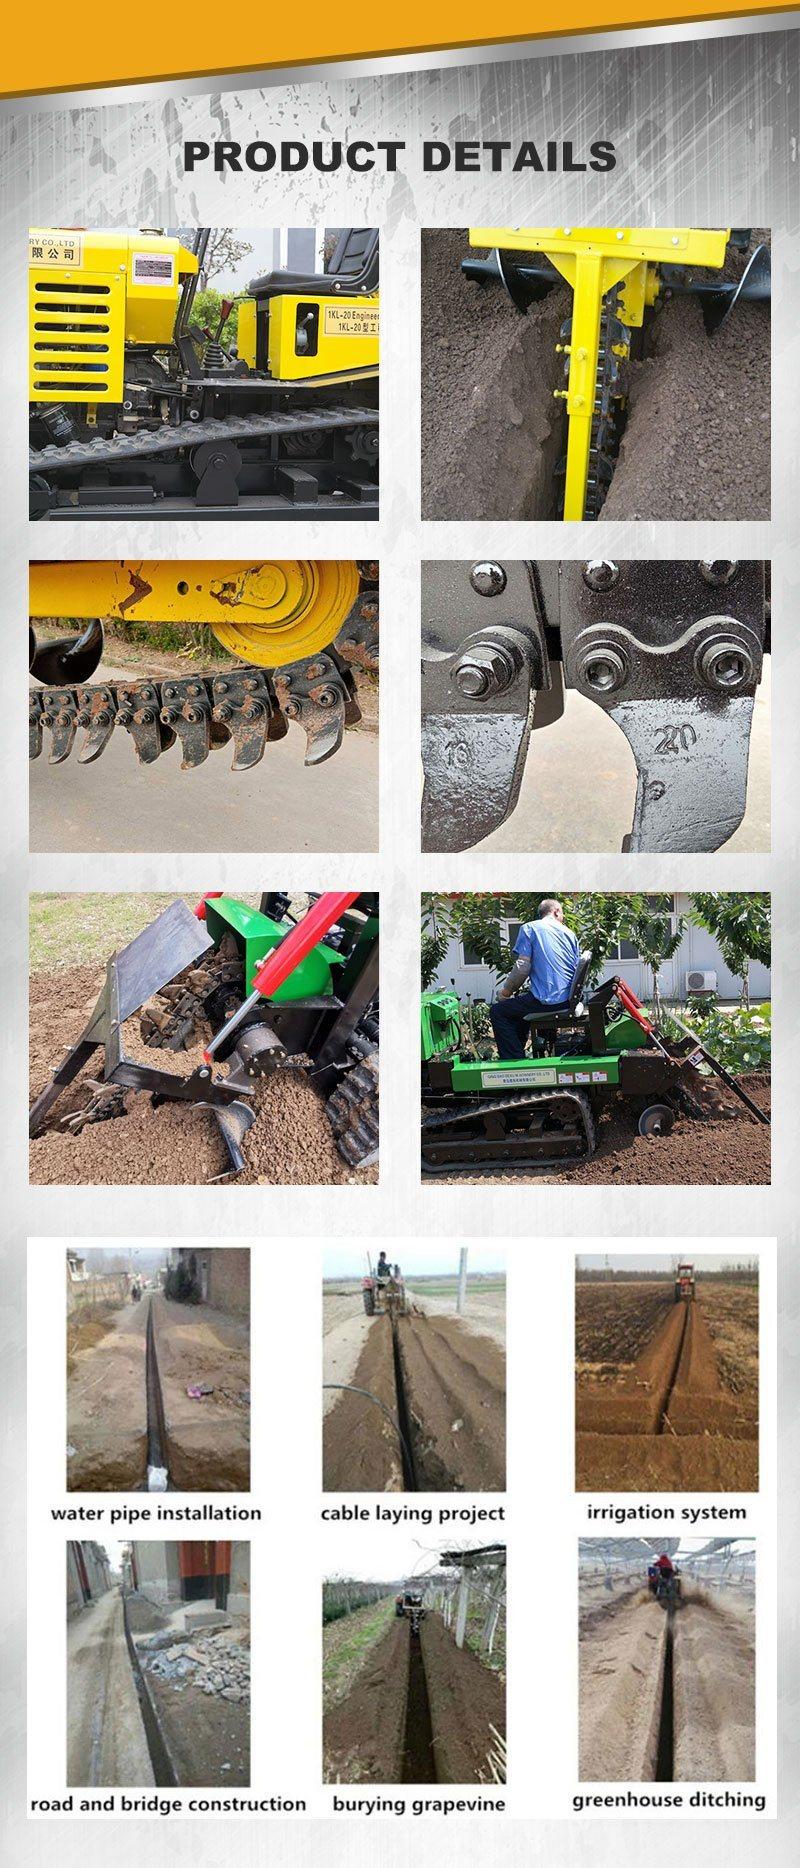 High Performanace Pavement Chain Trencher High Quality